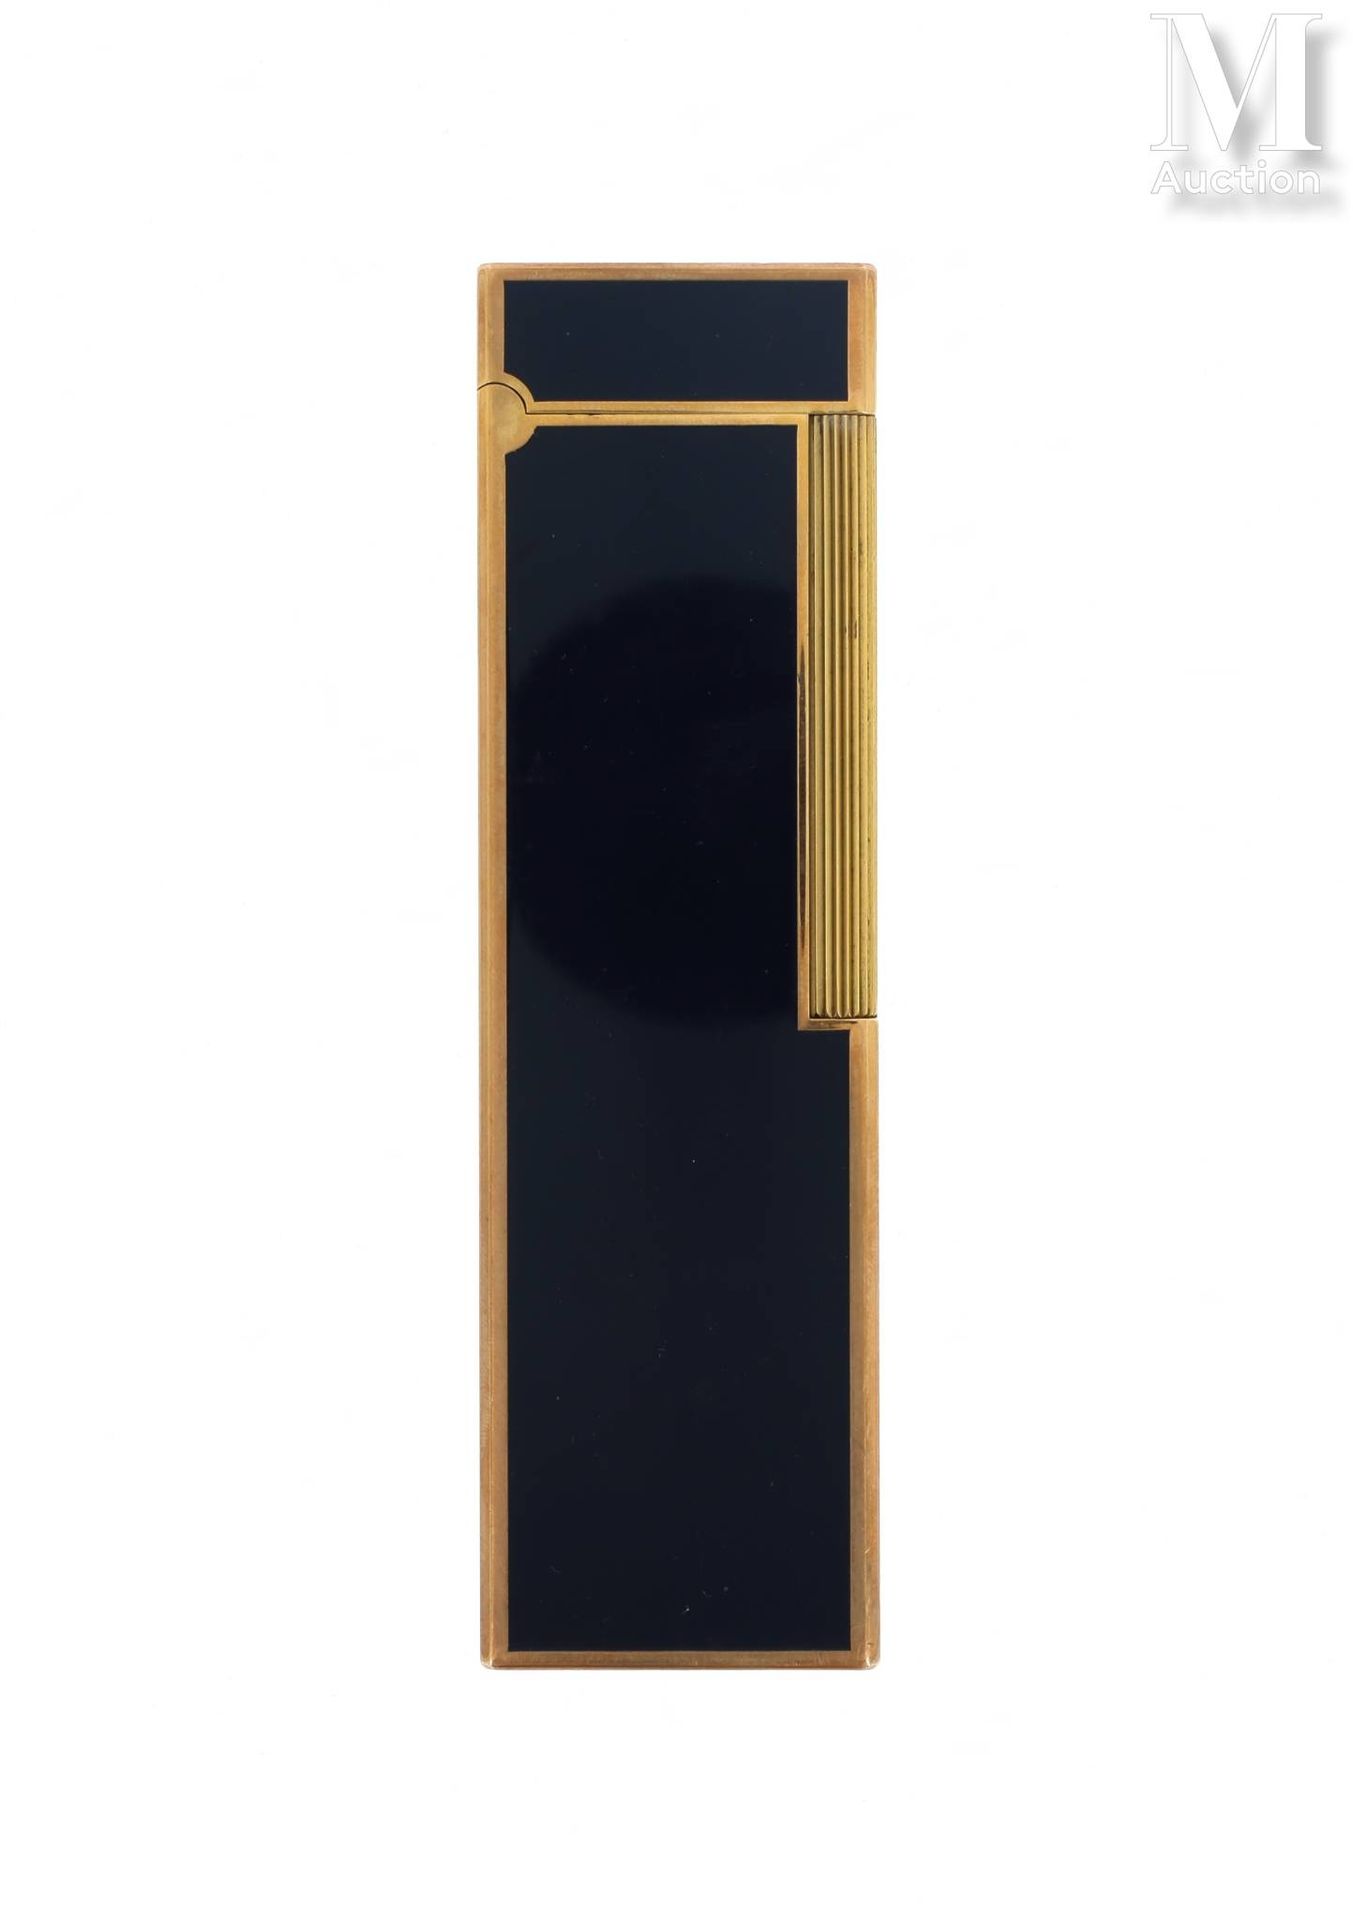 Briquet de table DUPONT DUPONT

Table lighter in gilded metal and navy blue lacq&hellip;